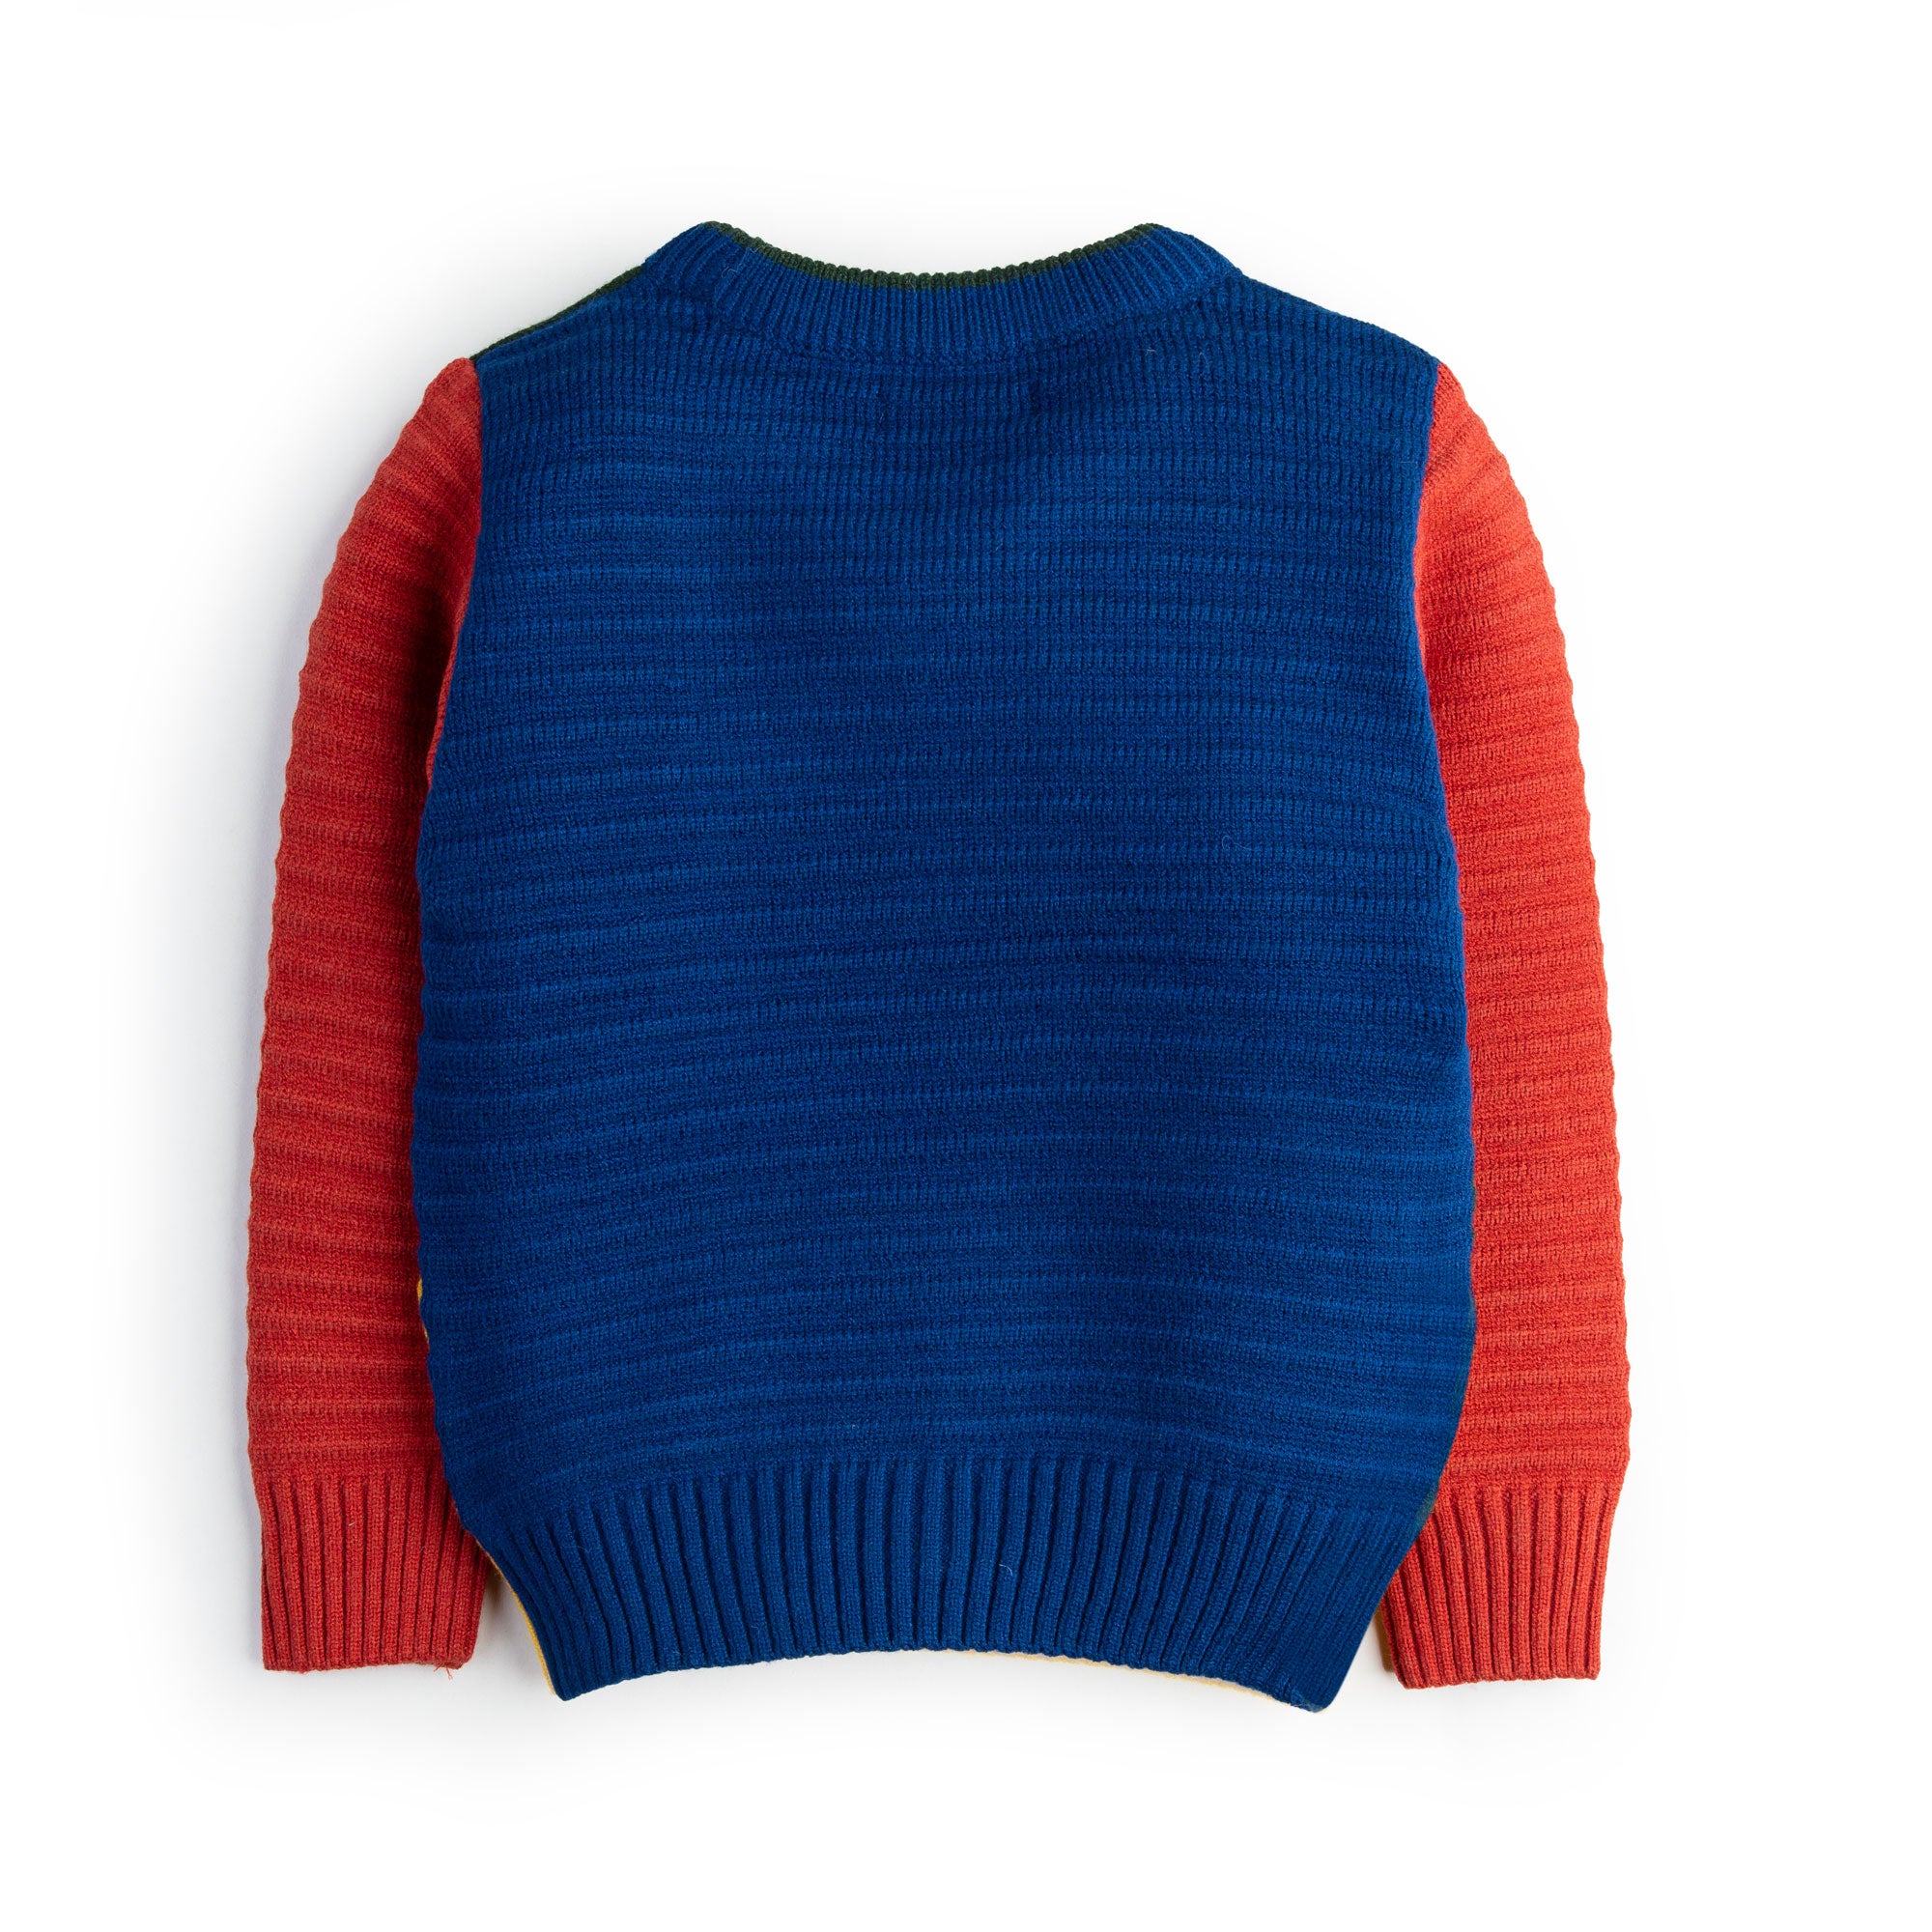 Multi Radiant Knitted Sweater